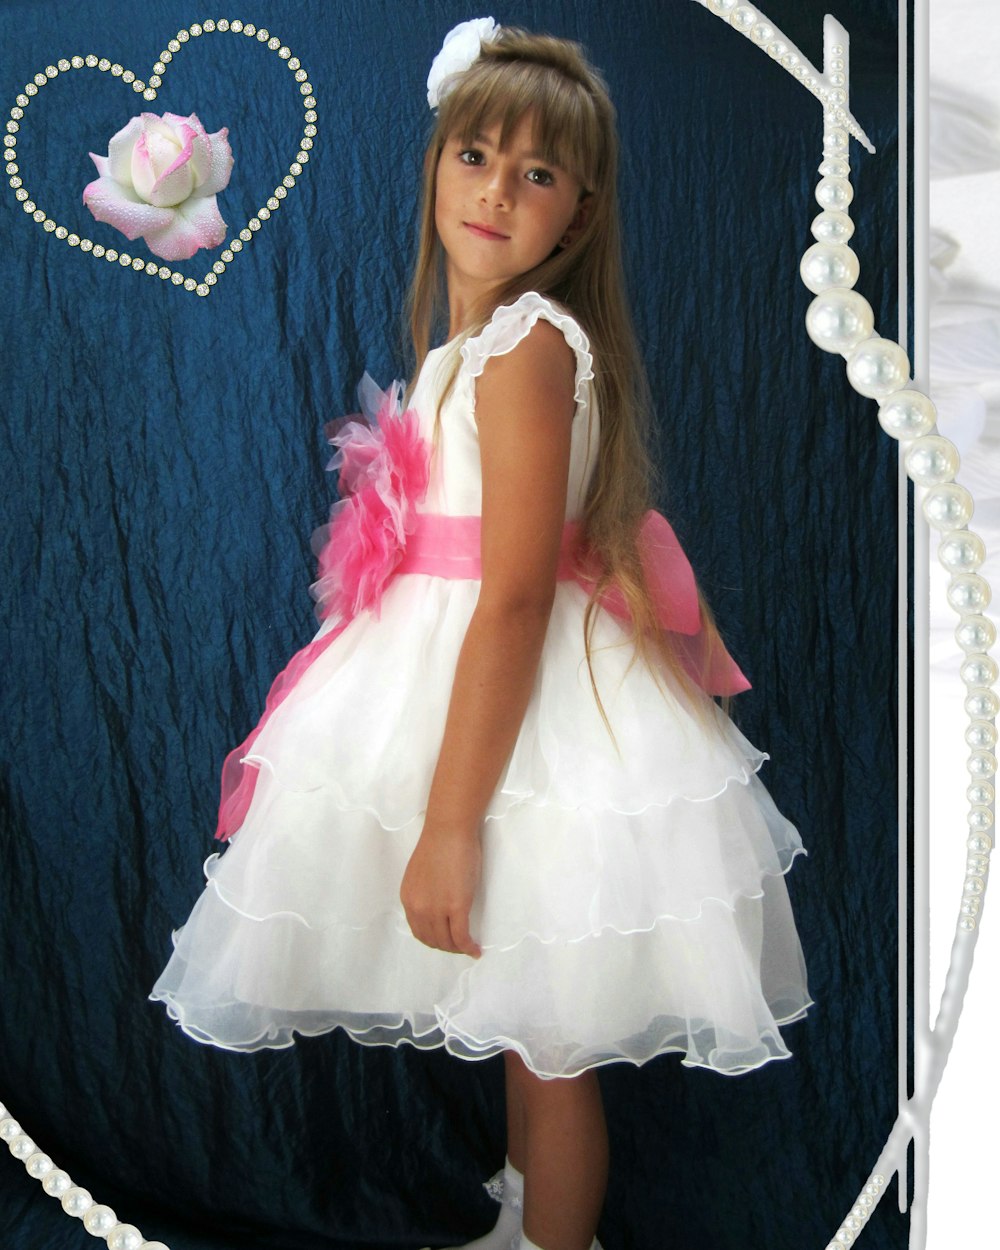 a little girl in a white dress with a pink bow